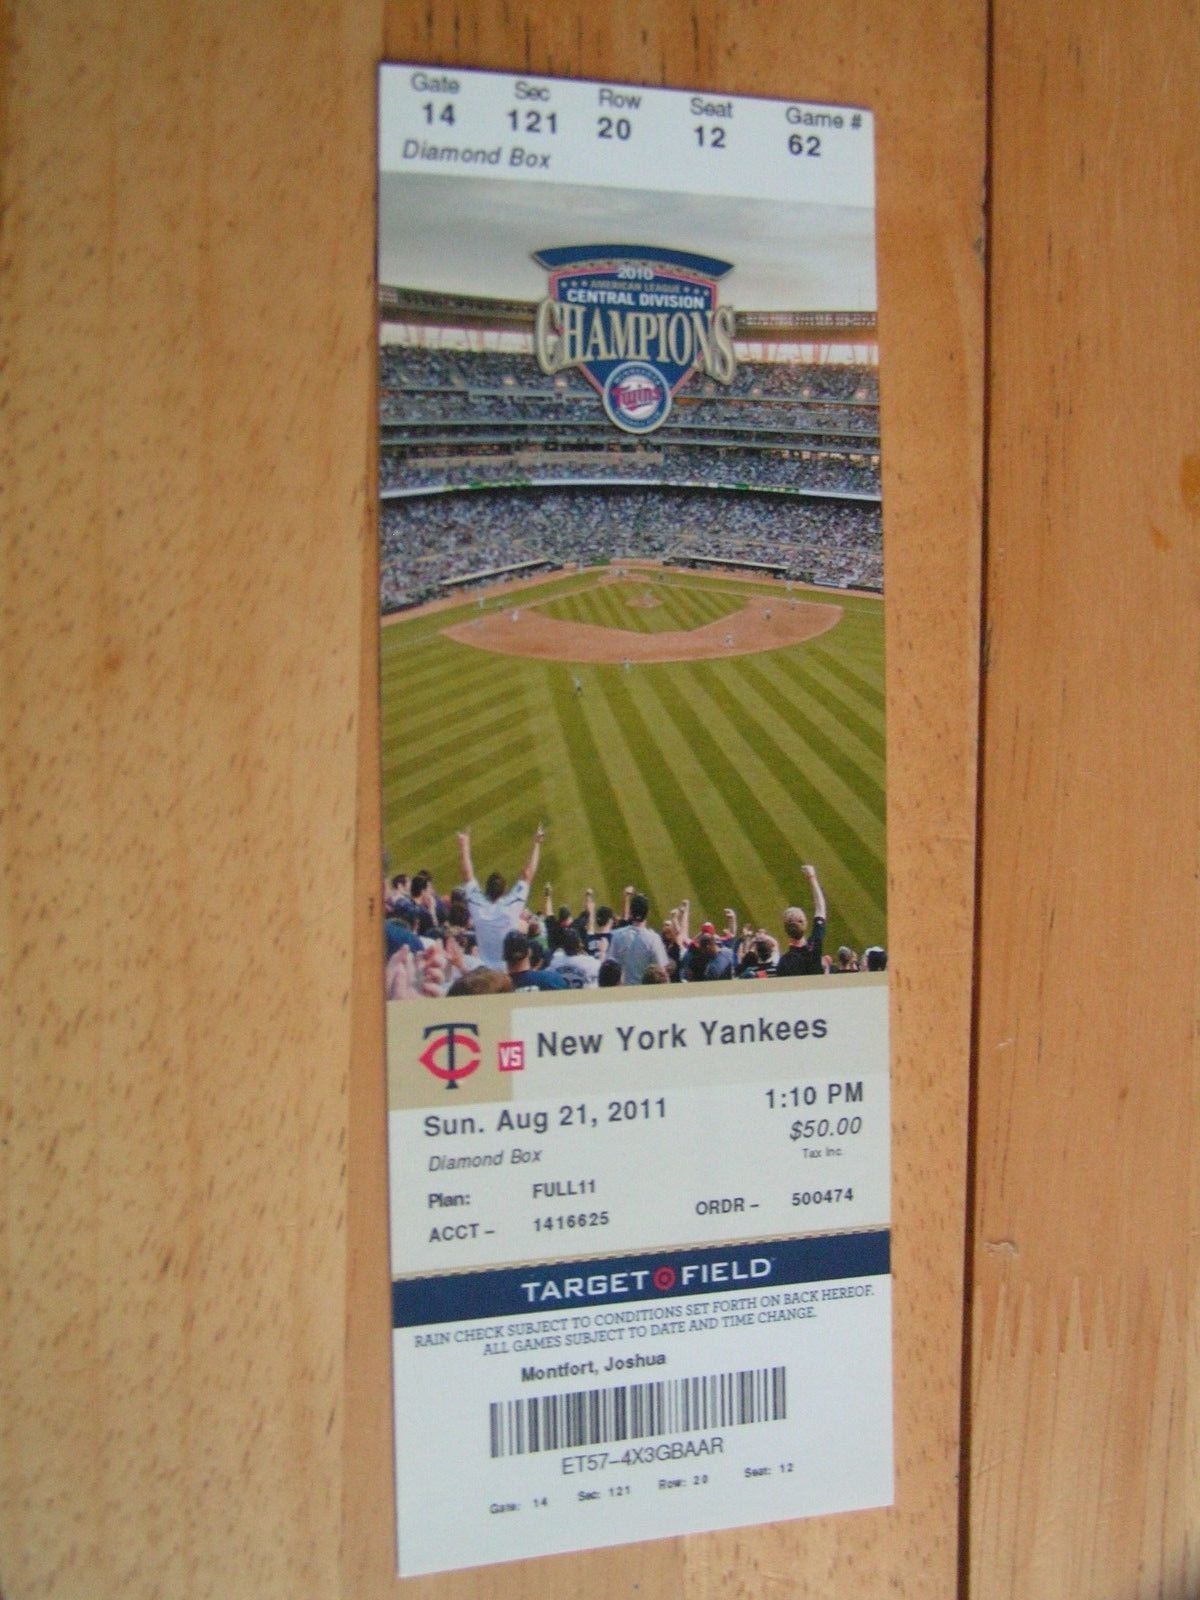 Primary image for MLB 2011 Minnesota Twins (Central Division Champs) Vs New York NY Yankees 8/21